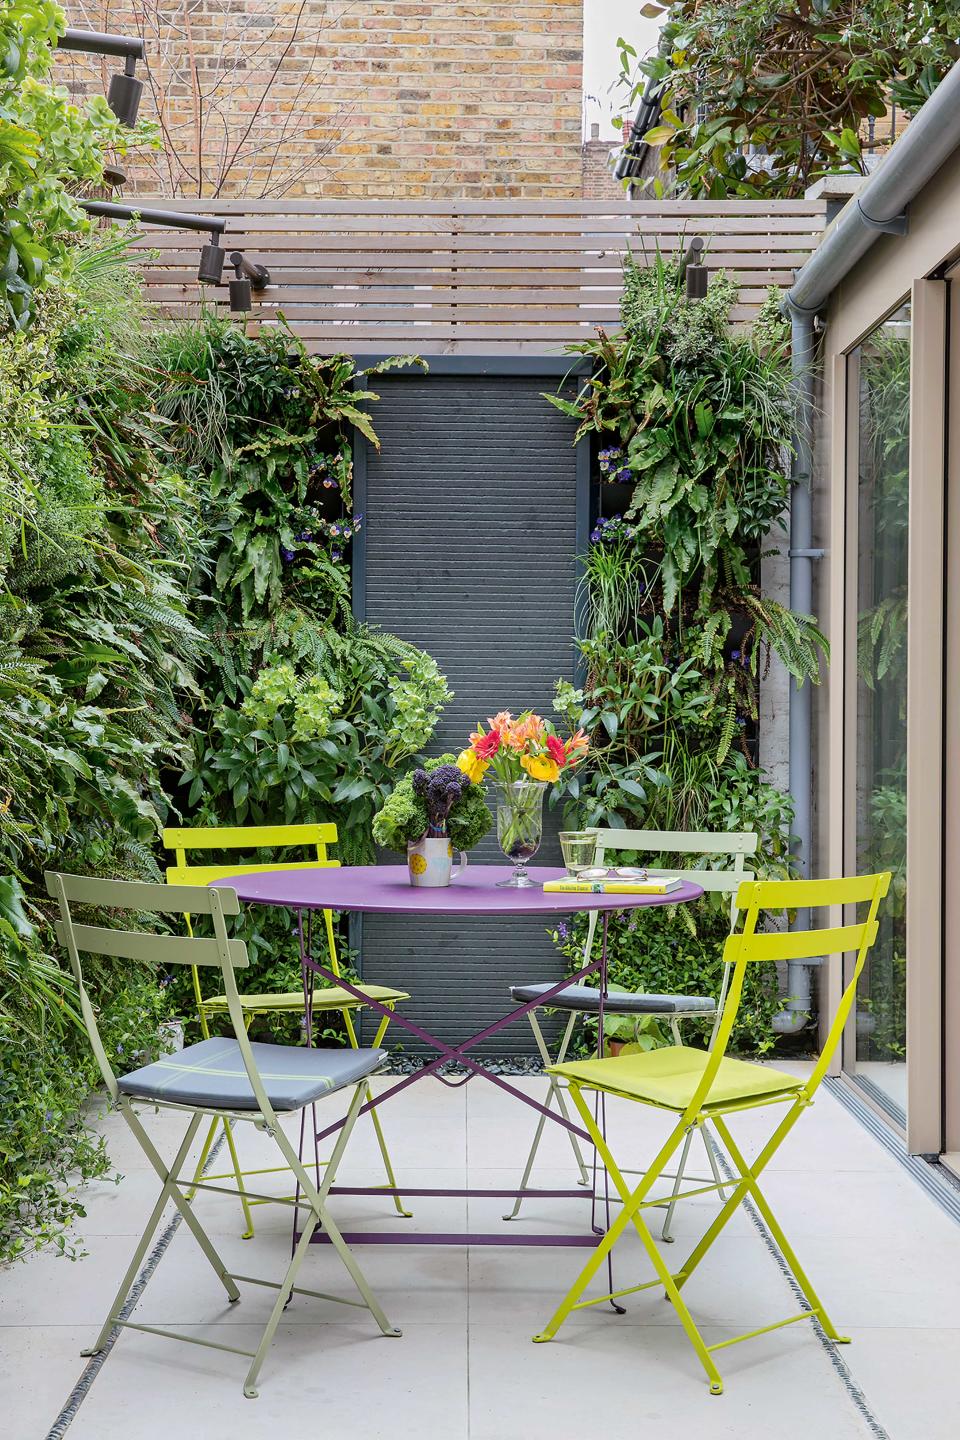 Mix up bright shades for your patio ideas